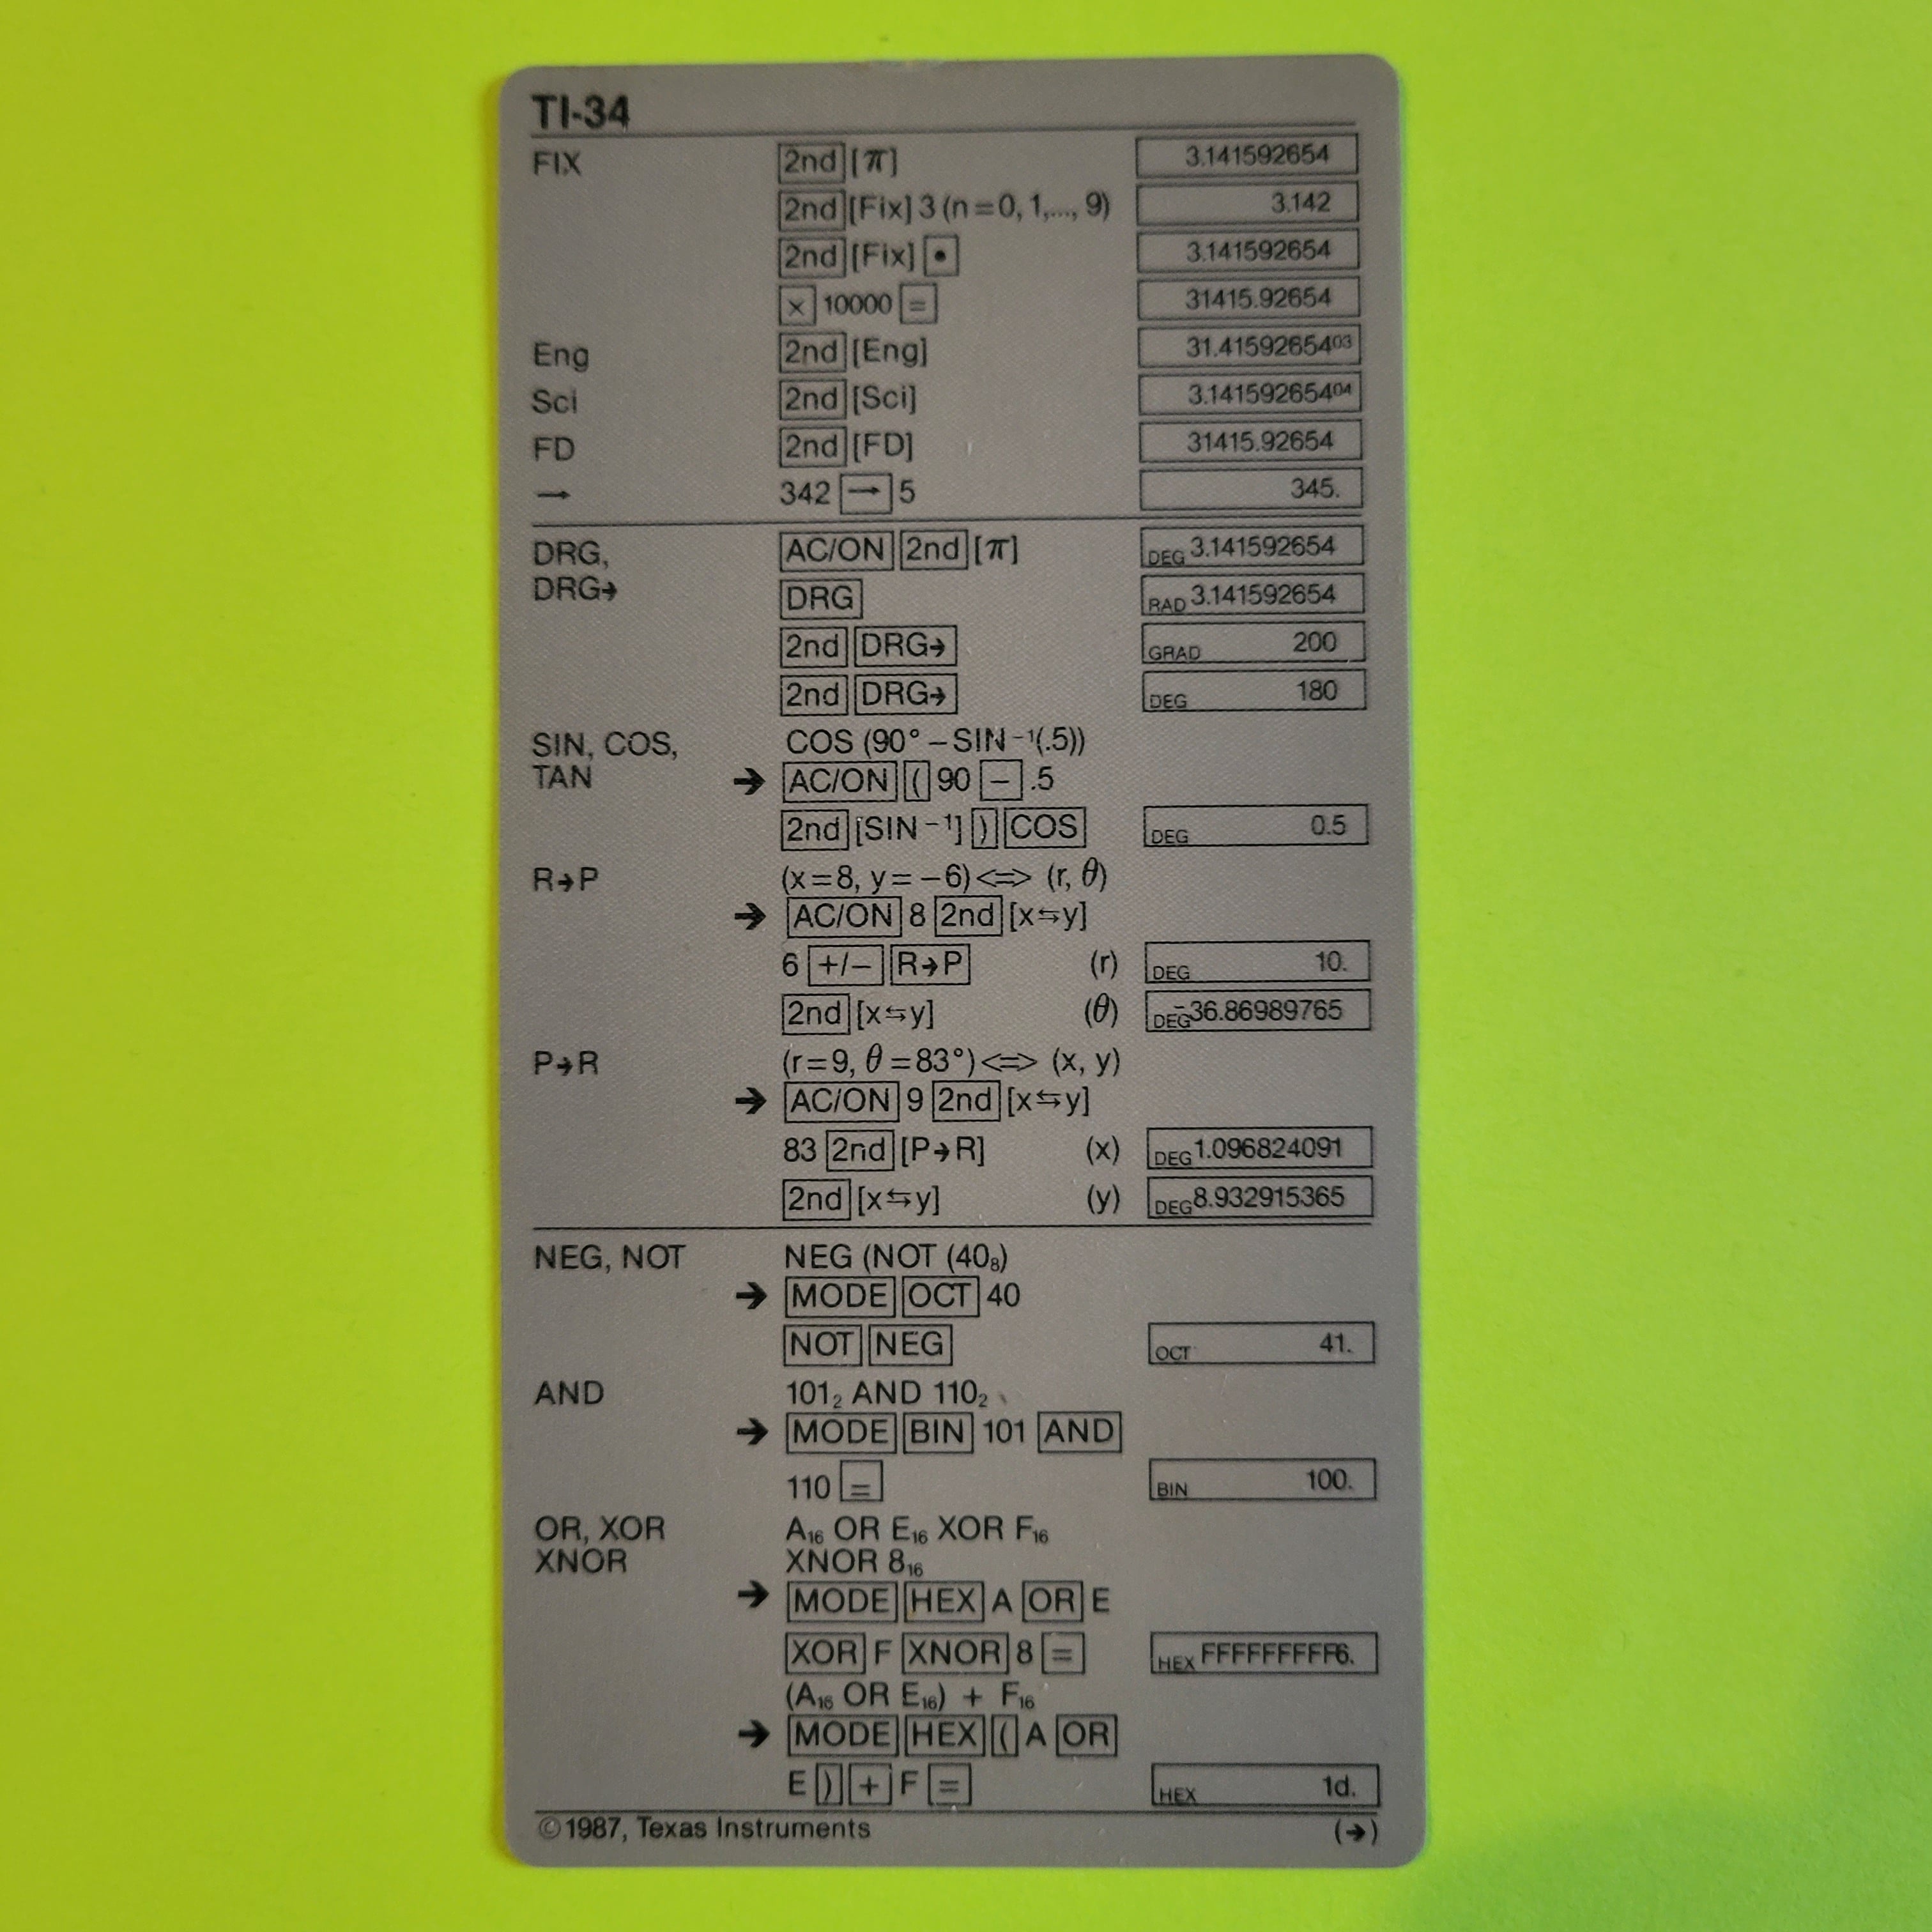 An image of the insert of a texas instruments ti-34 scientific/engineering calculator